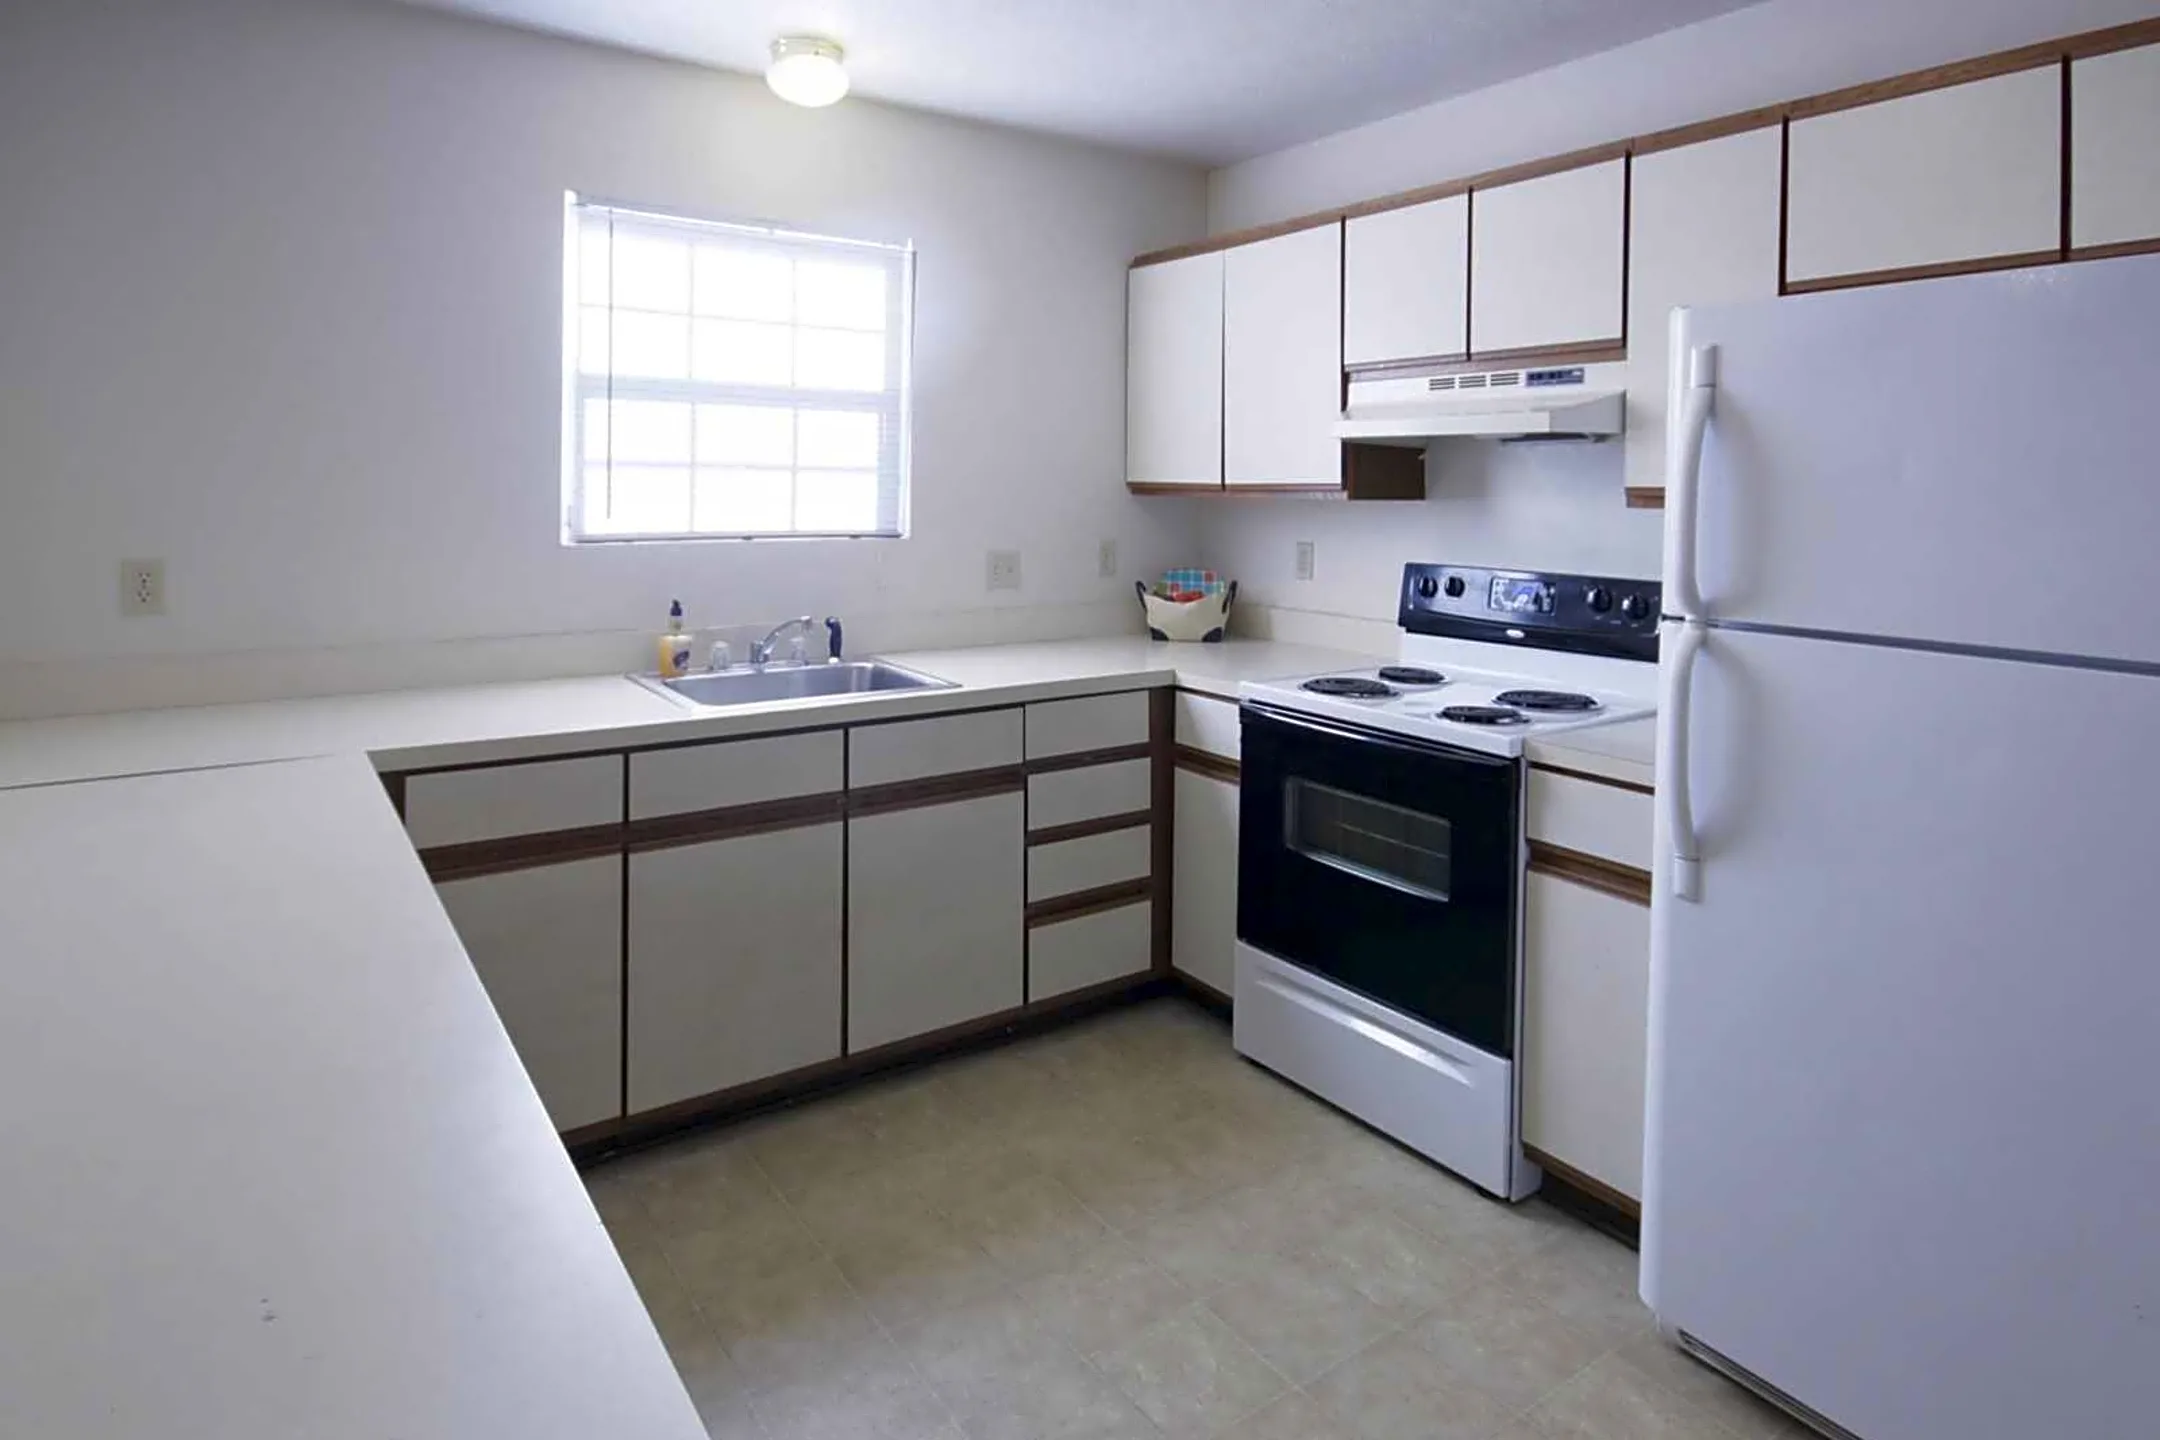 Kitchen - Eddy Street Student Townhomes - South Bend, IN